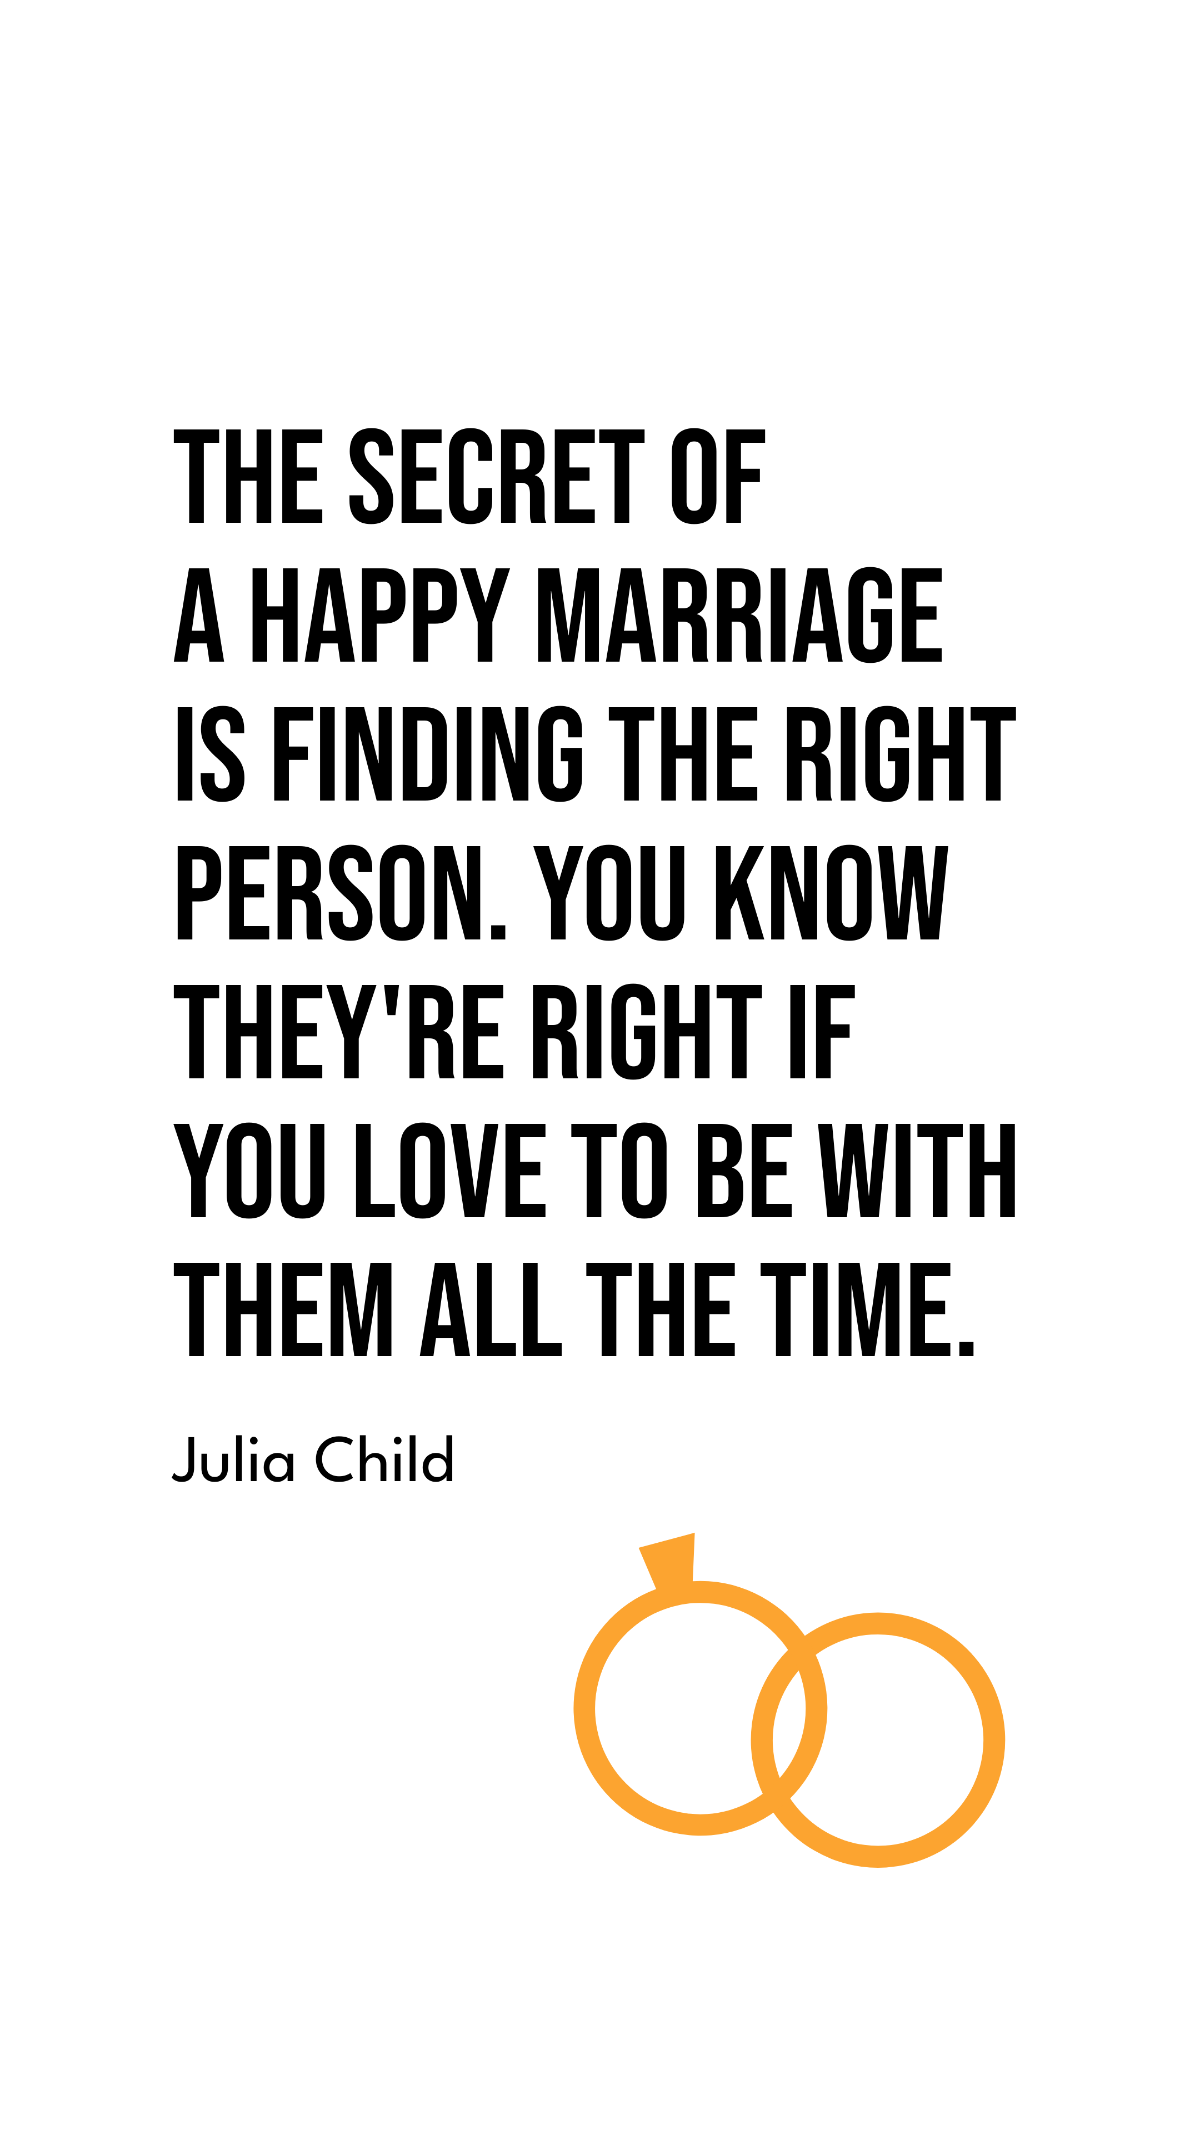 Julia Child - The secret of a happy marriage is finding the right ...